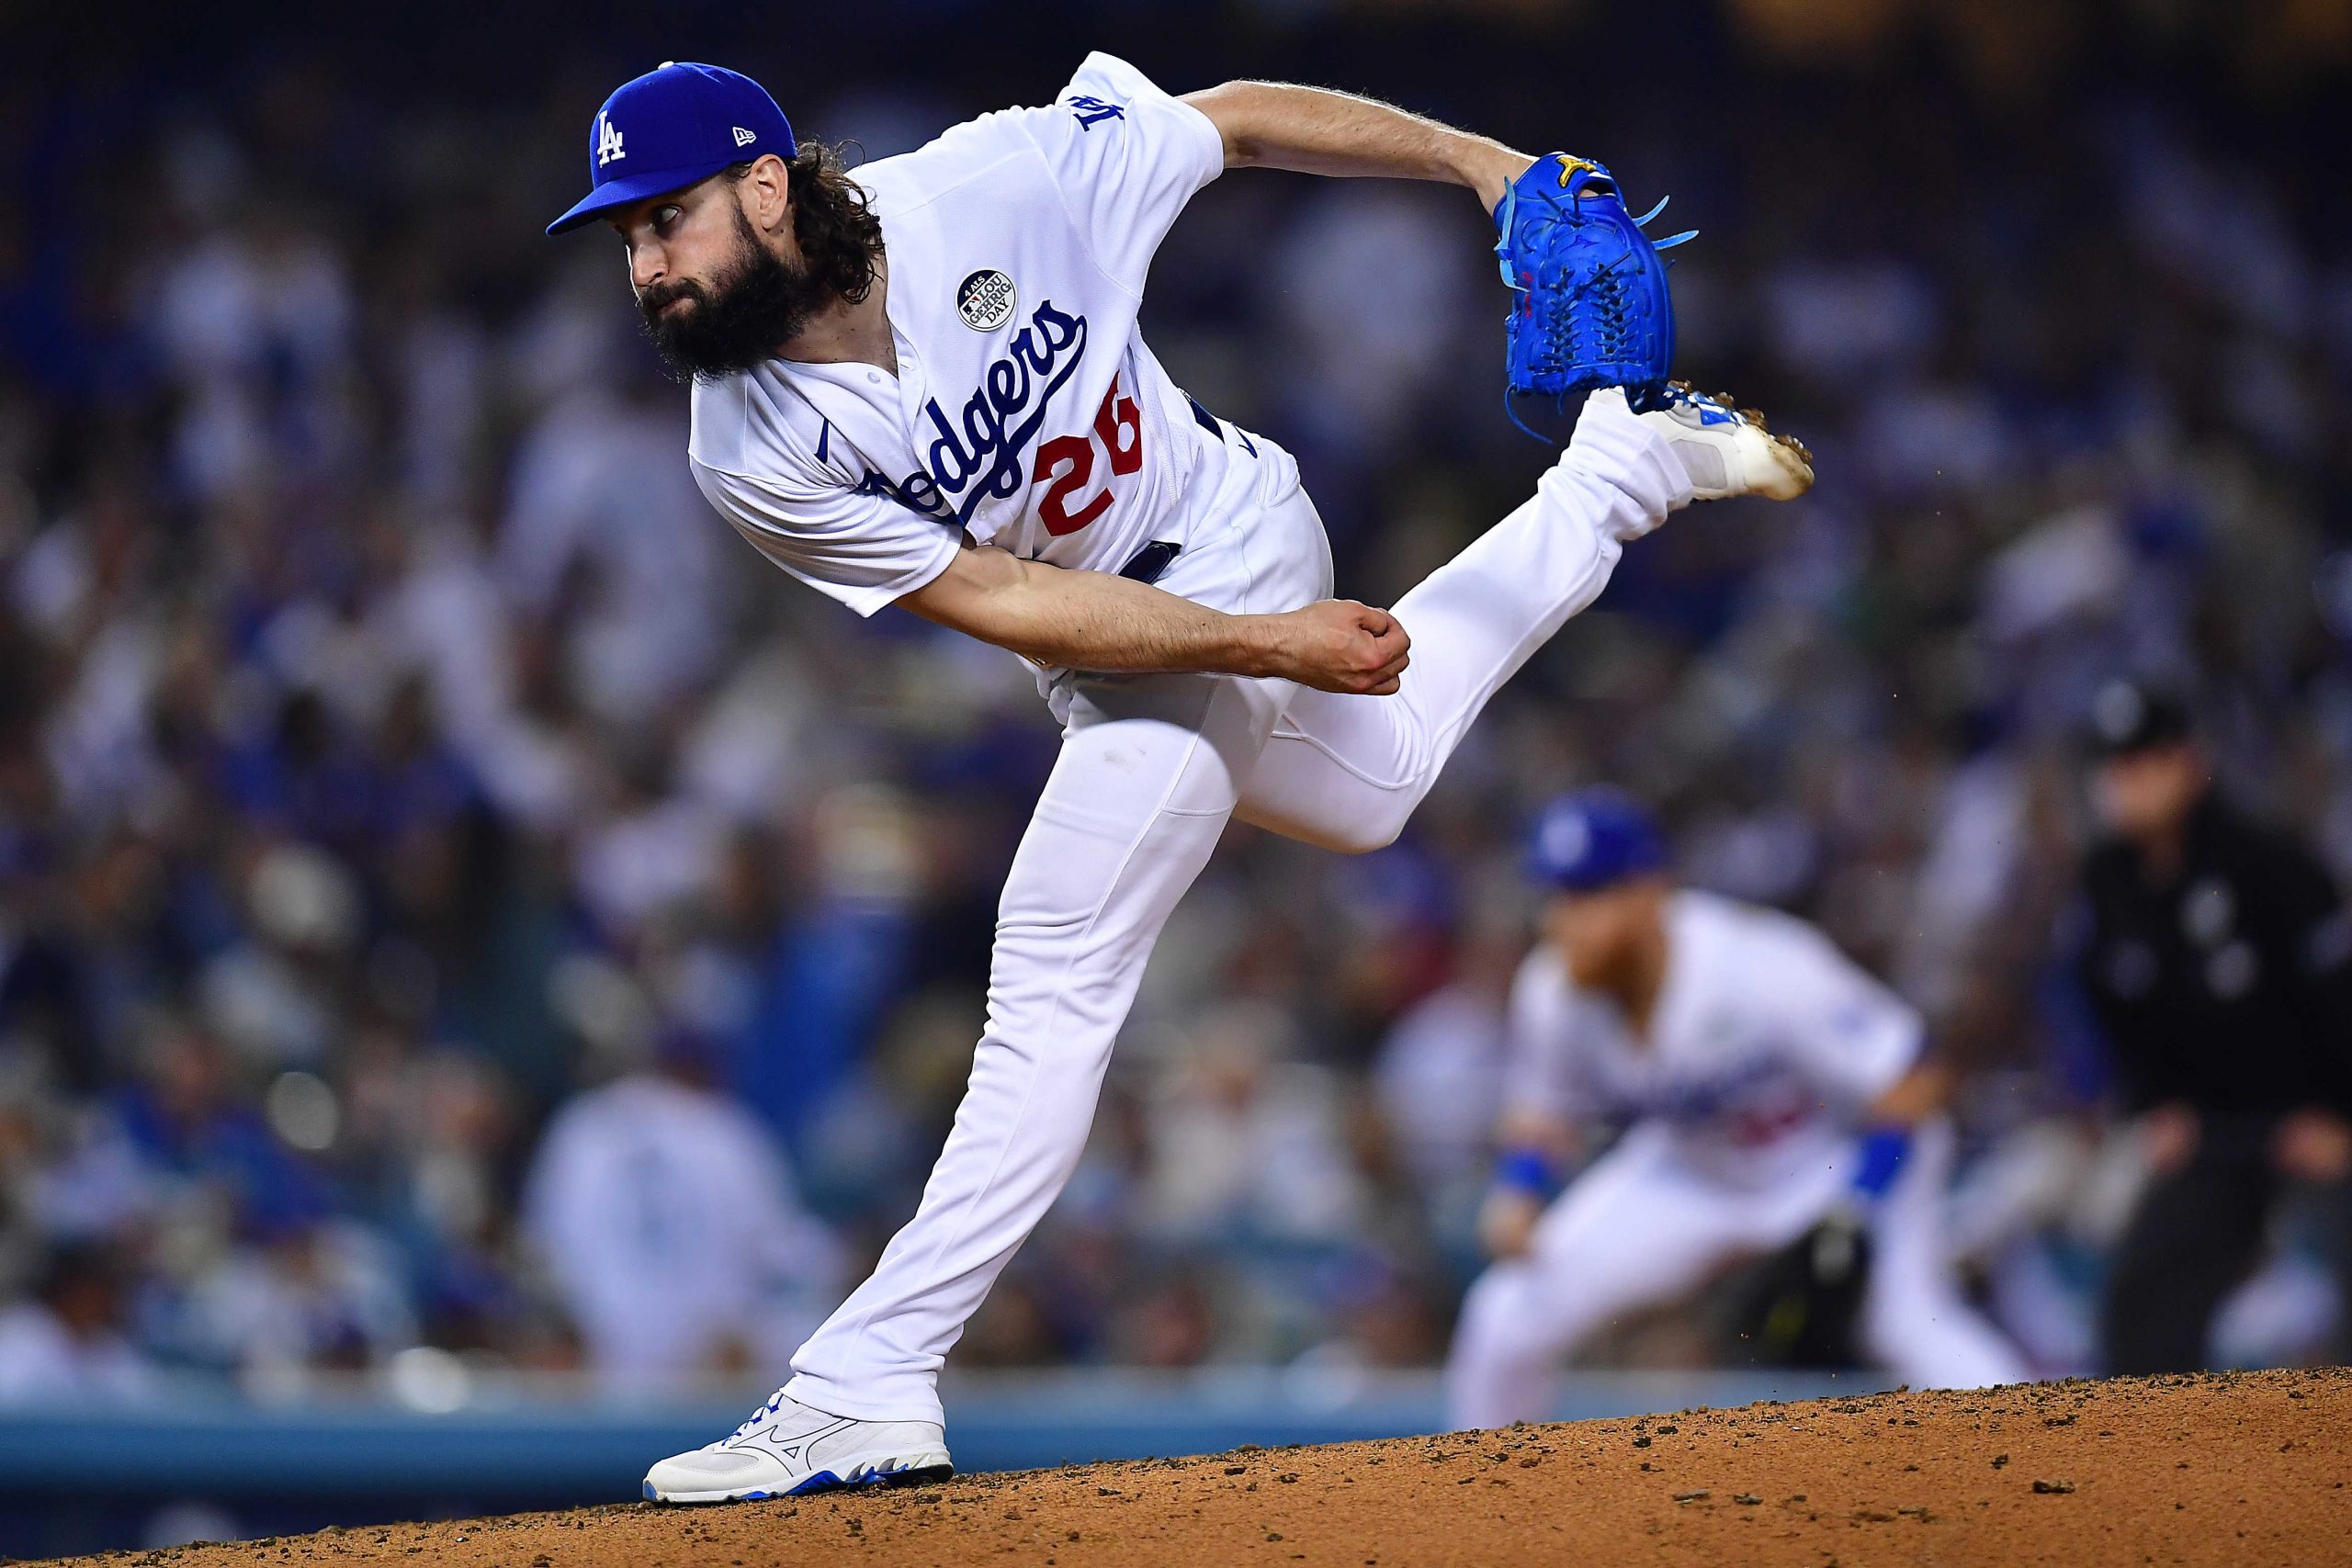 Los Angeles Dodgers starting pitcher Tony Gonsolin (26) throws against the New York Mets during the sixth inning at Dodger Stadium.